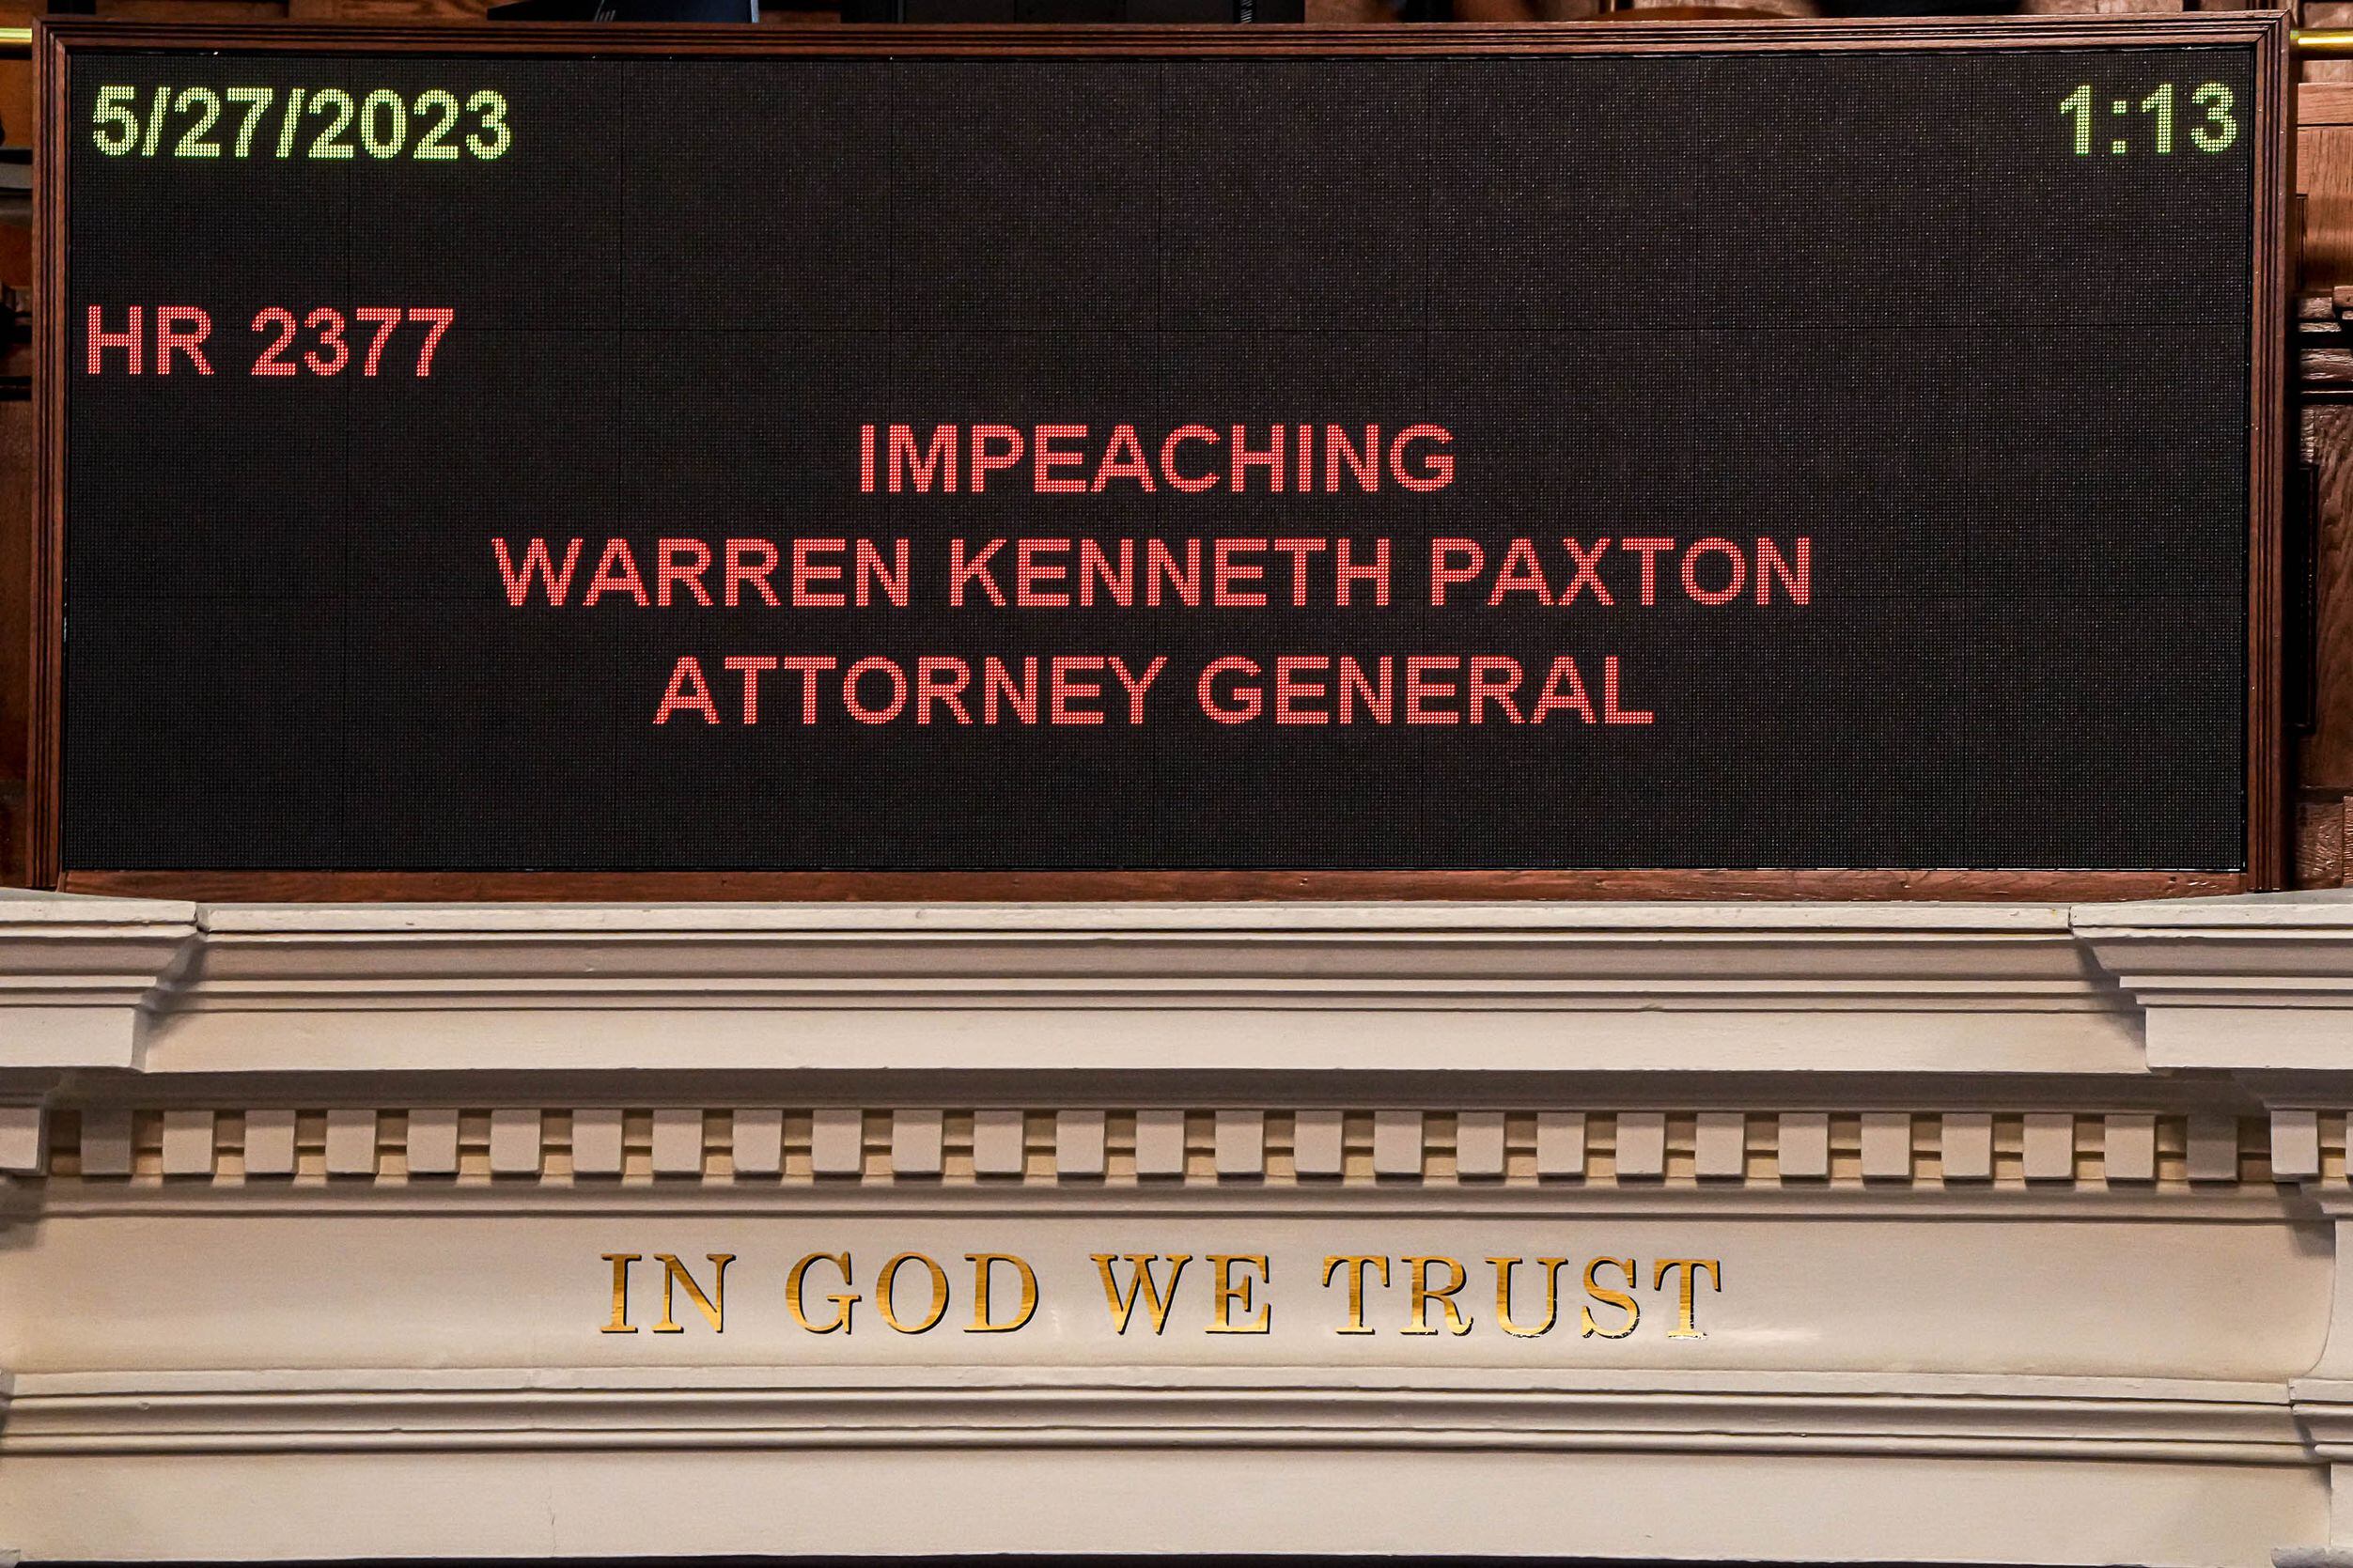 The board in the Texas ouse Chamber announces a hearing of HR 2377 regarding the impeachment...